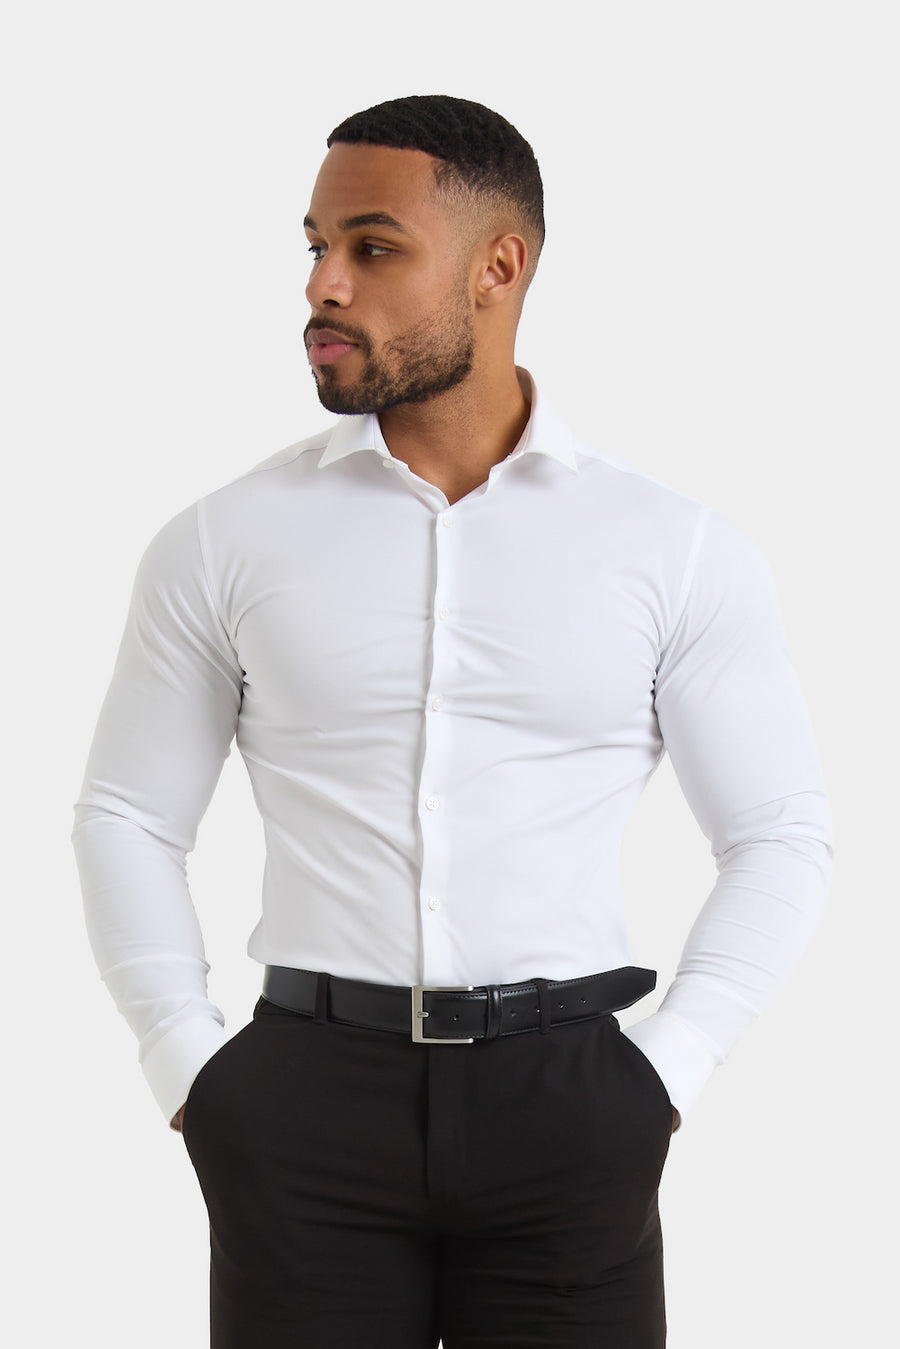 Athletic Fit Dress Shirt 4-Pack - TAILORED ATHLETE - USA